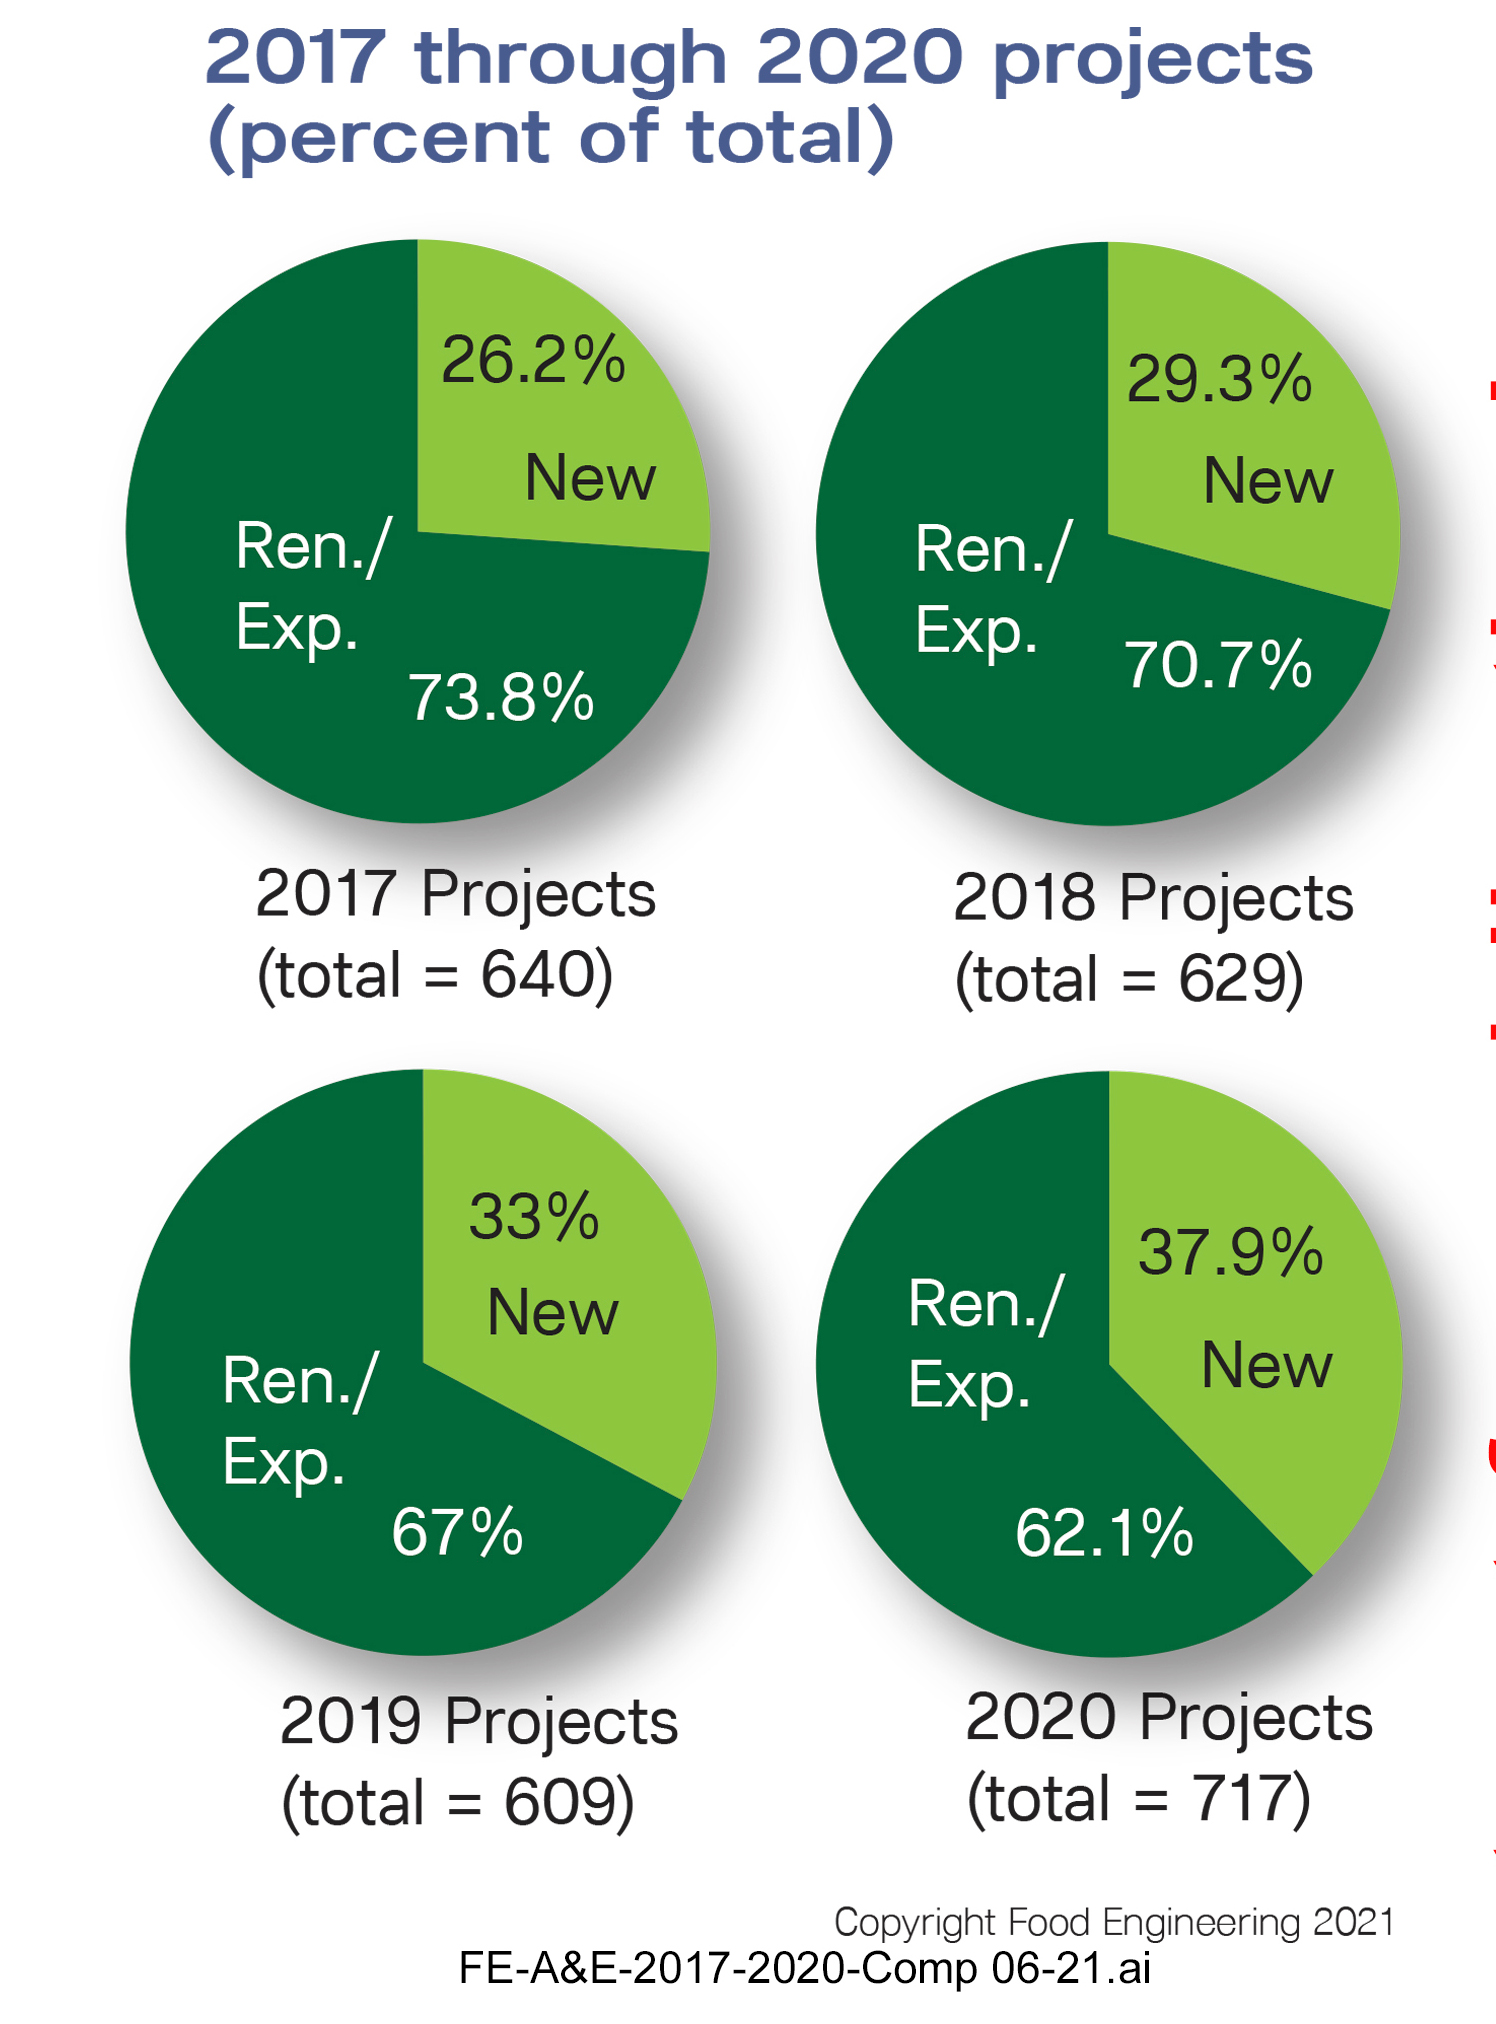 New construction vs. renovations/expansions